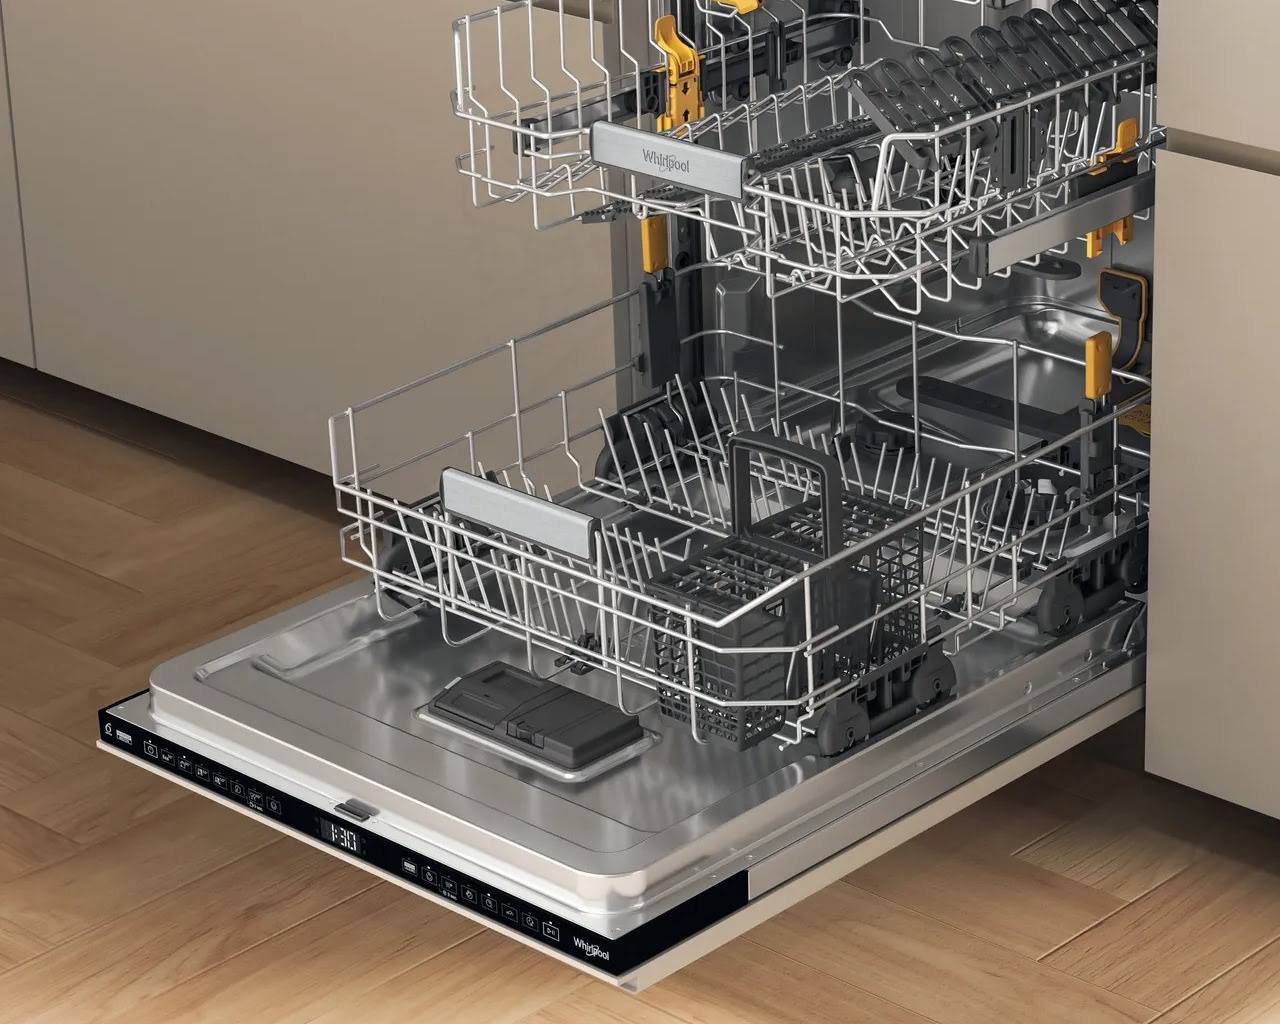 How To Fix The Error Code 45017 For Whirlpool Dishwasher